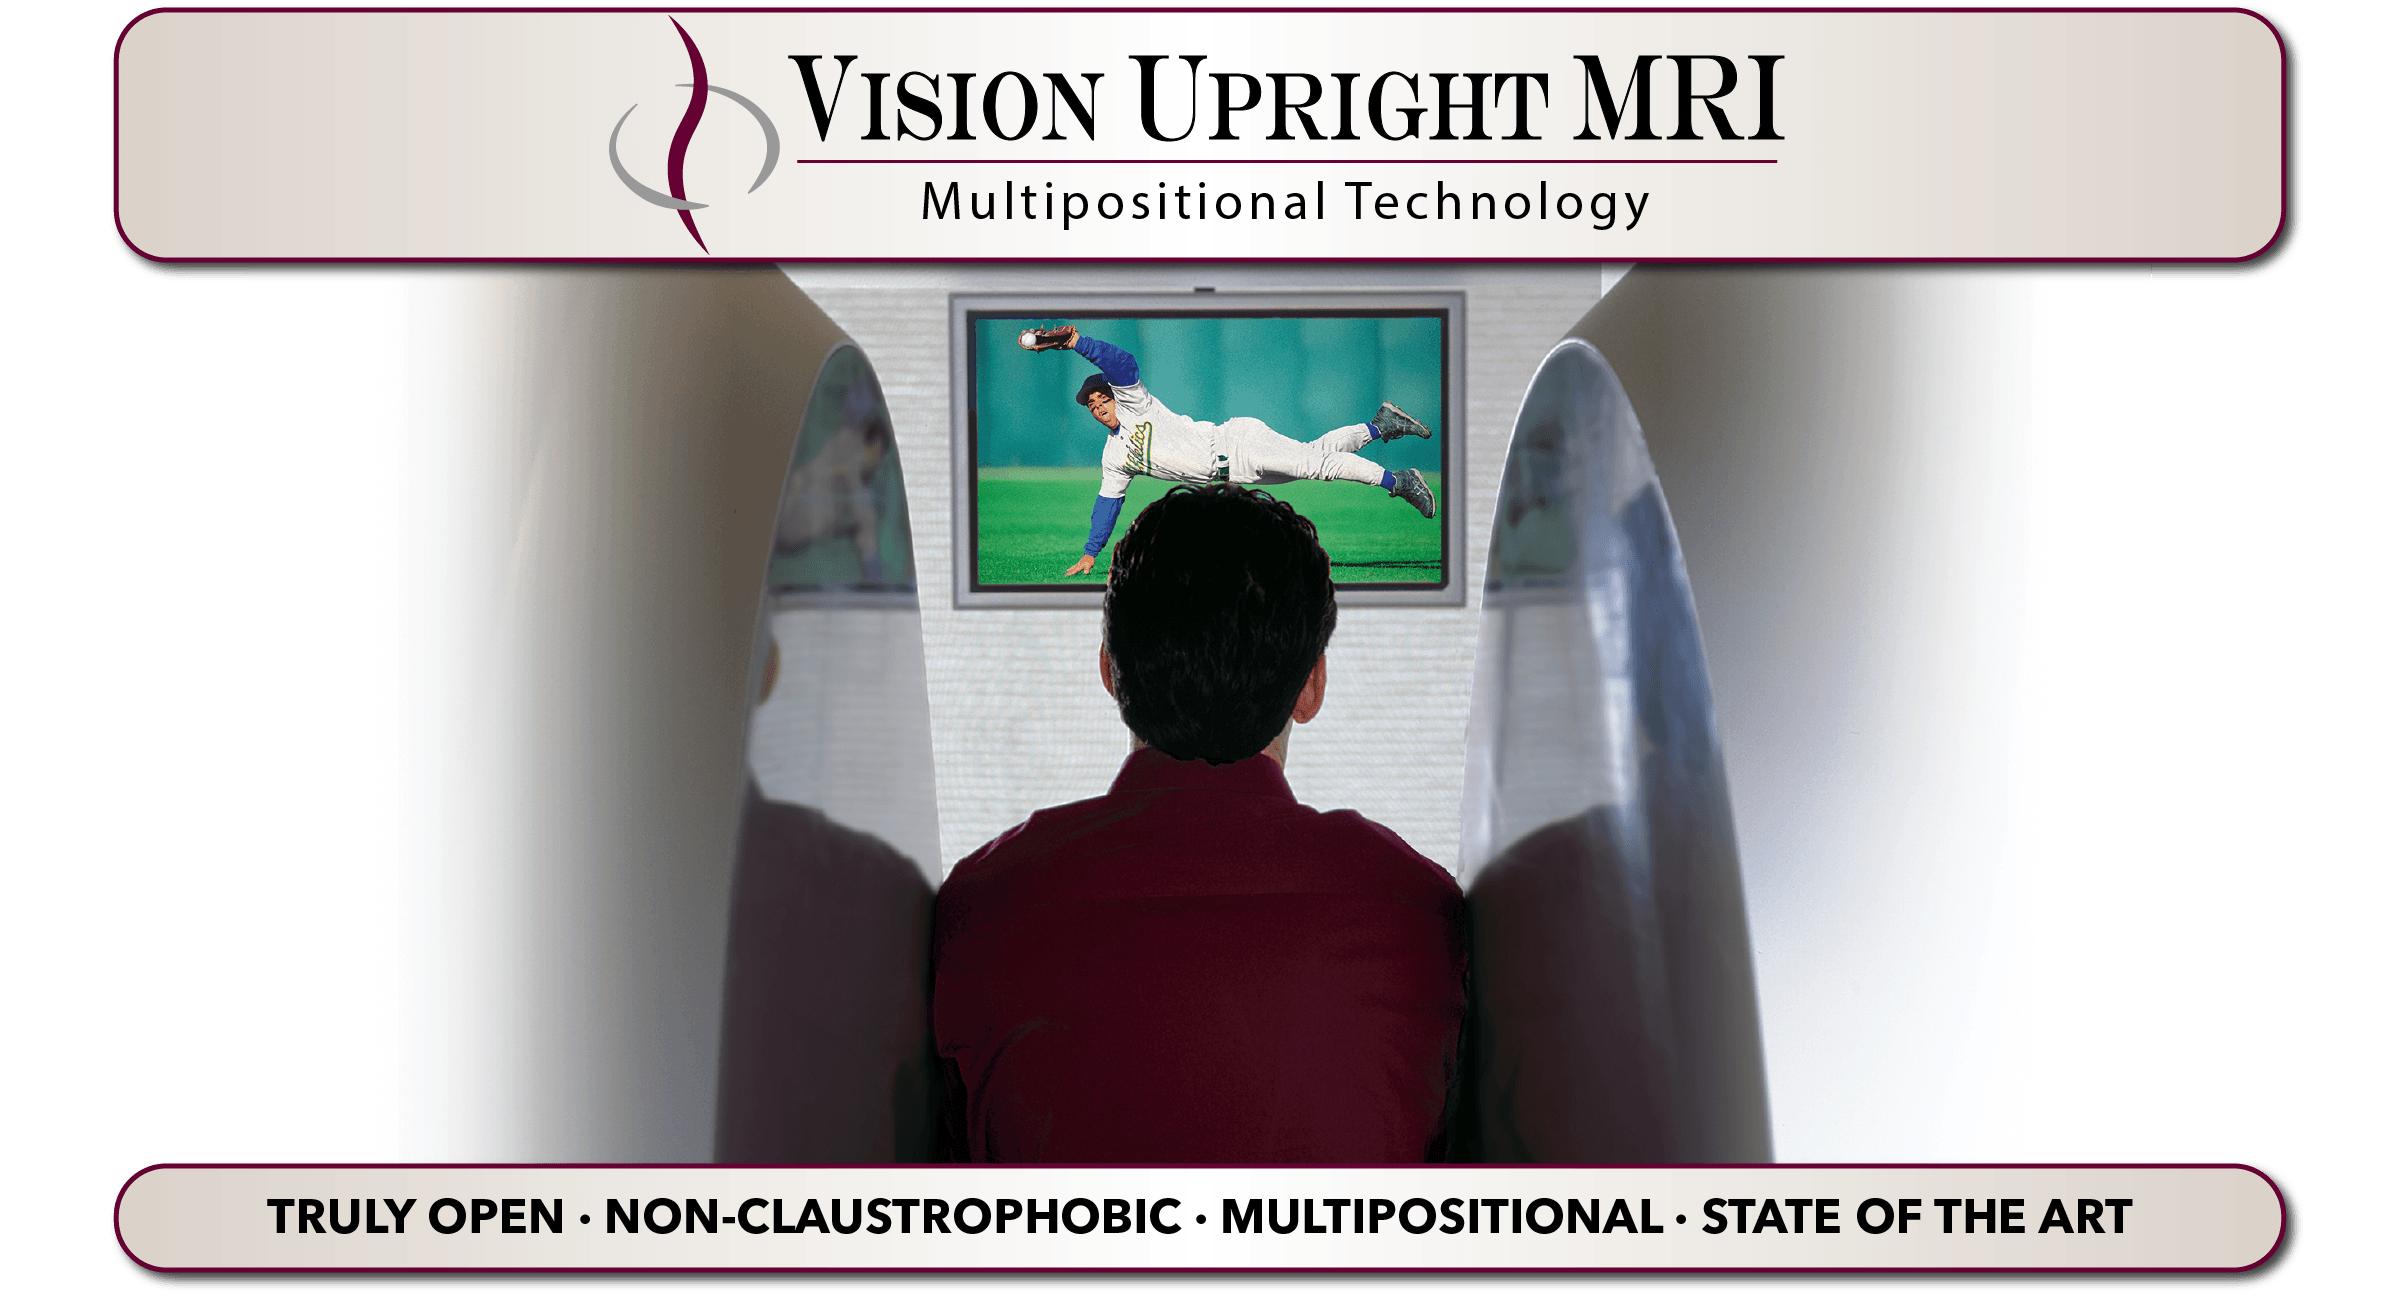 Vision MRI offers a state of the art standing truly open MRI